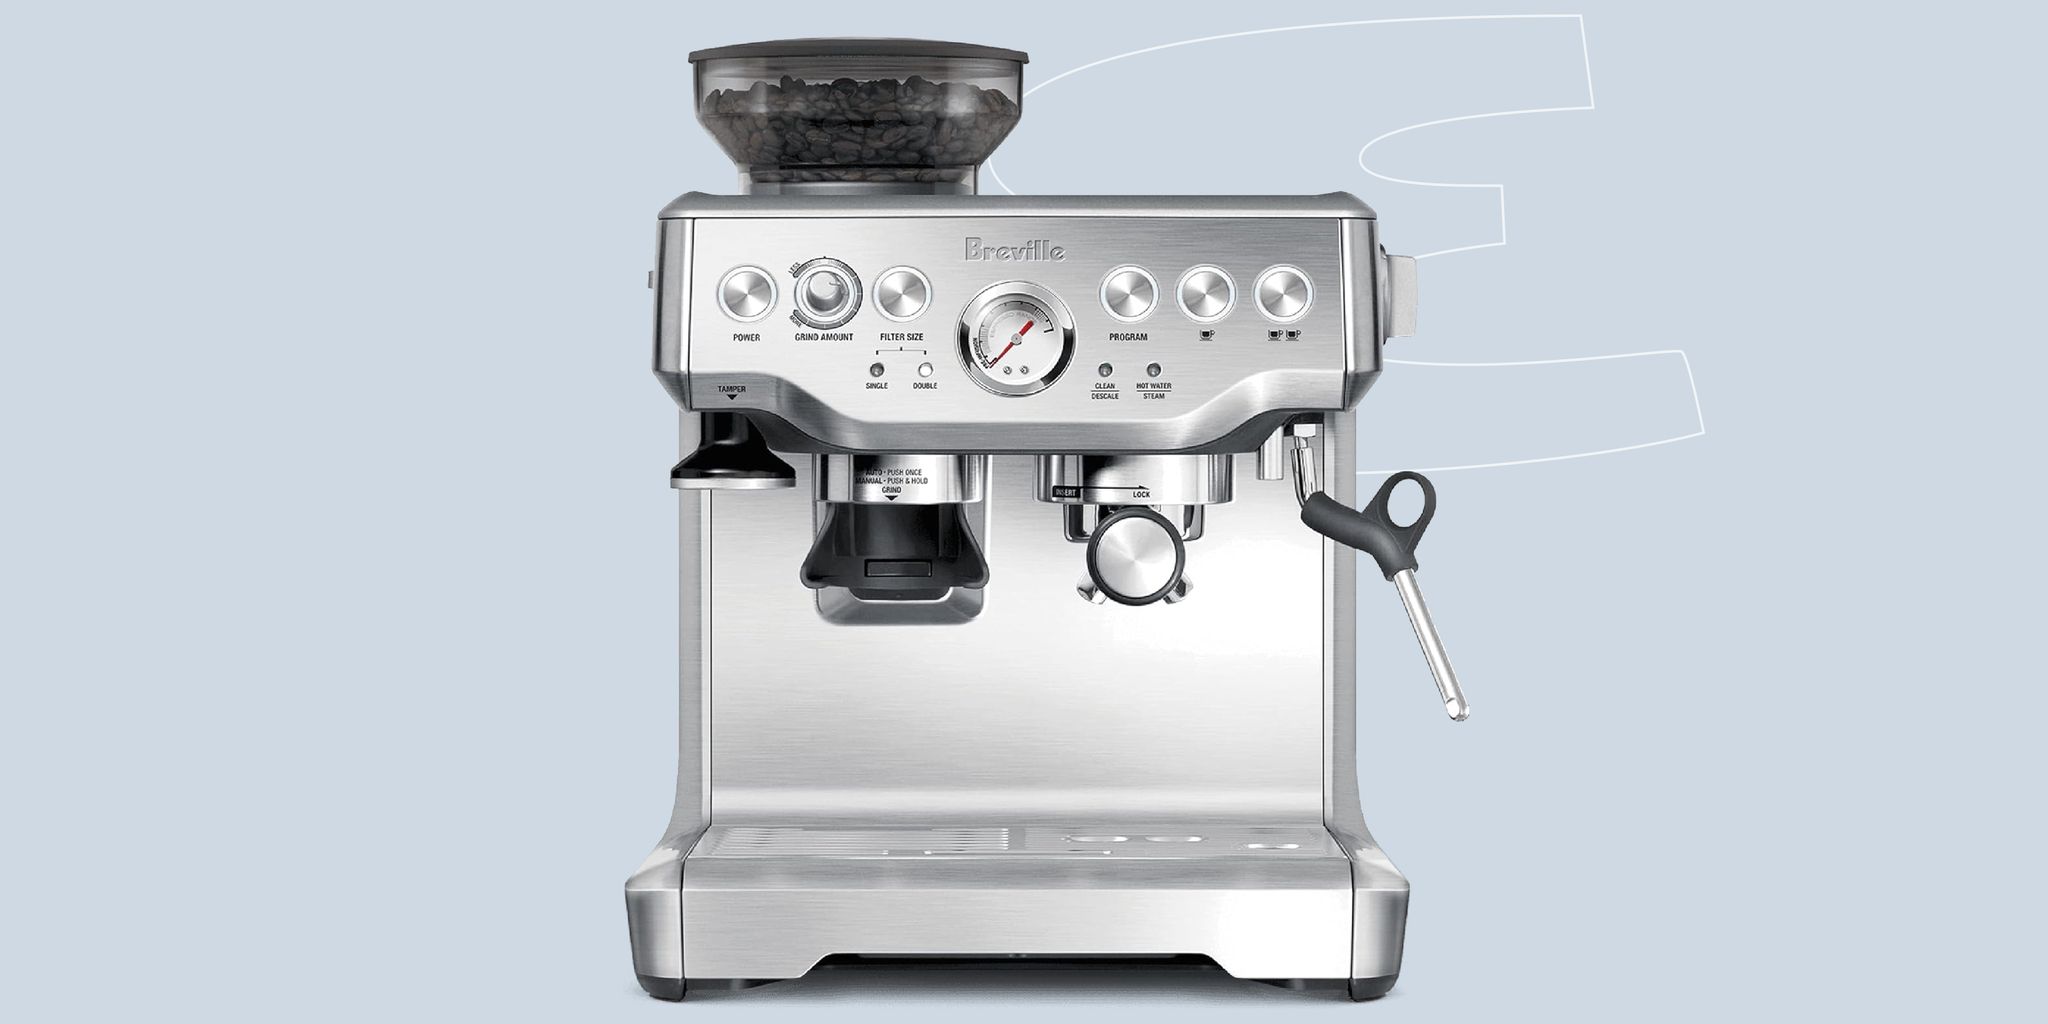 Shop the best Cyber Monday coffee maker and espresso deals